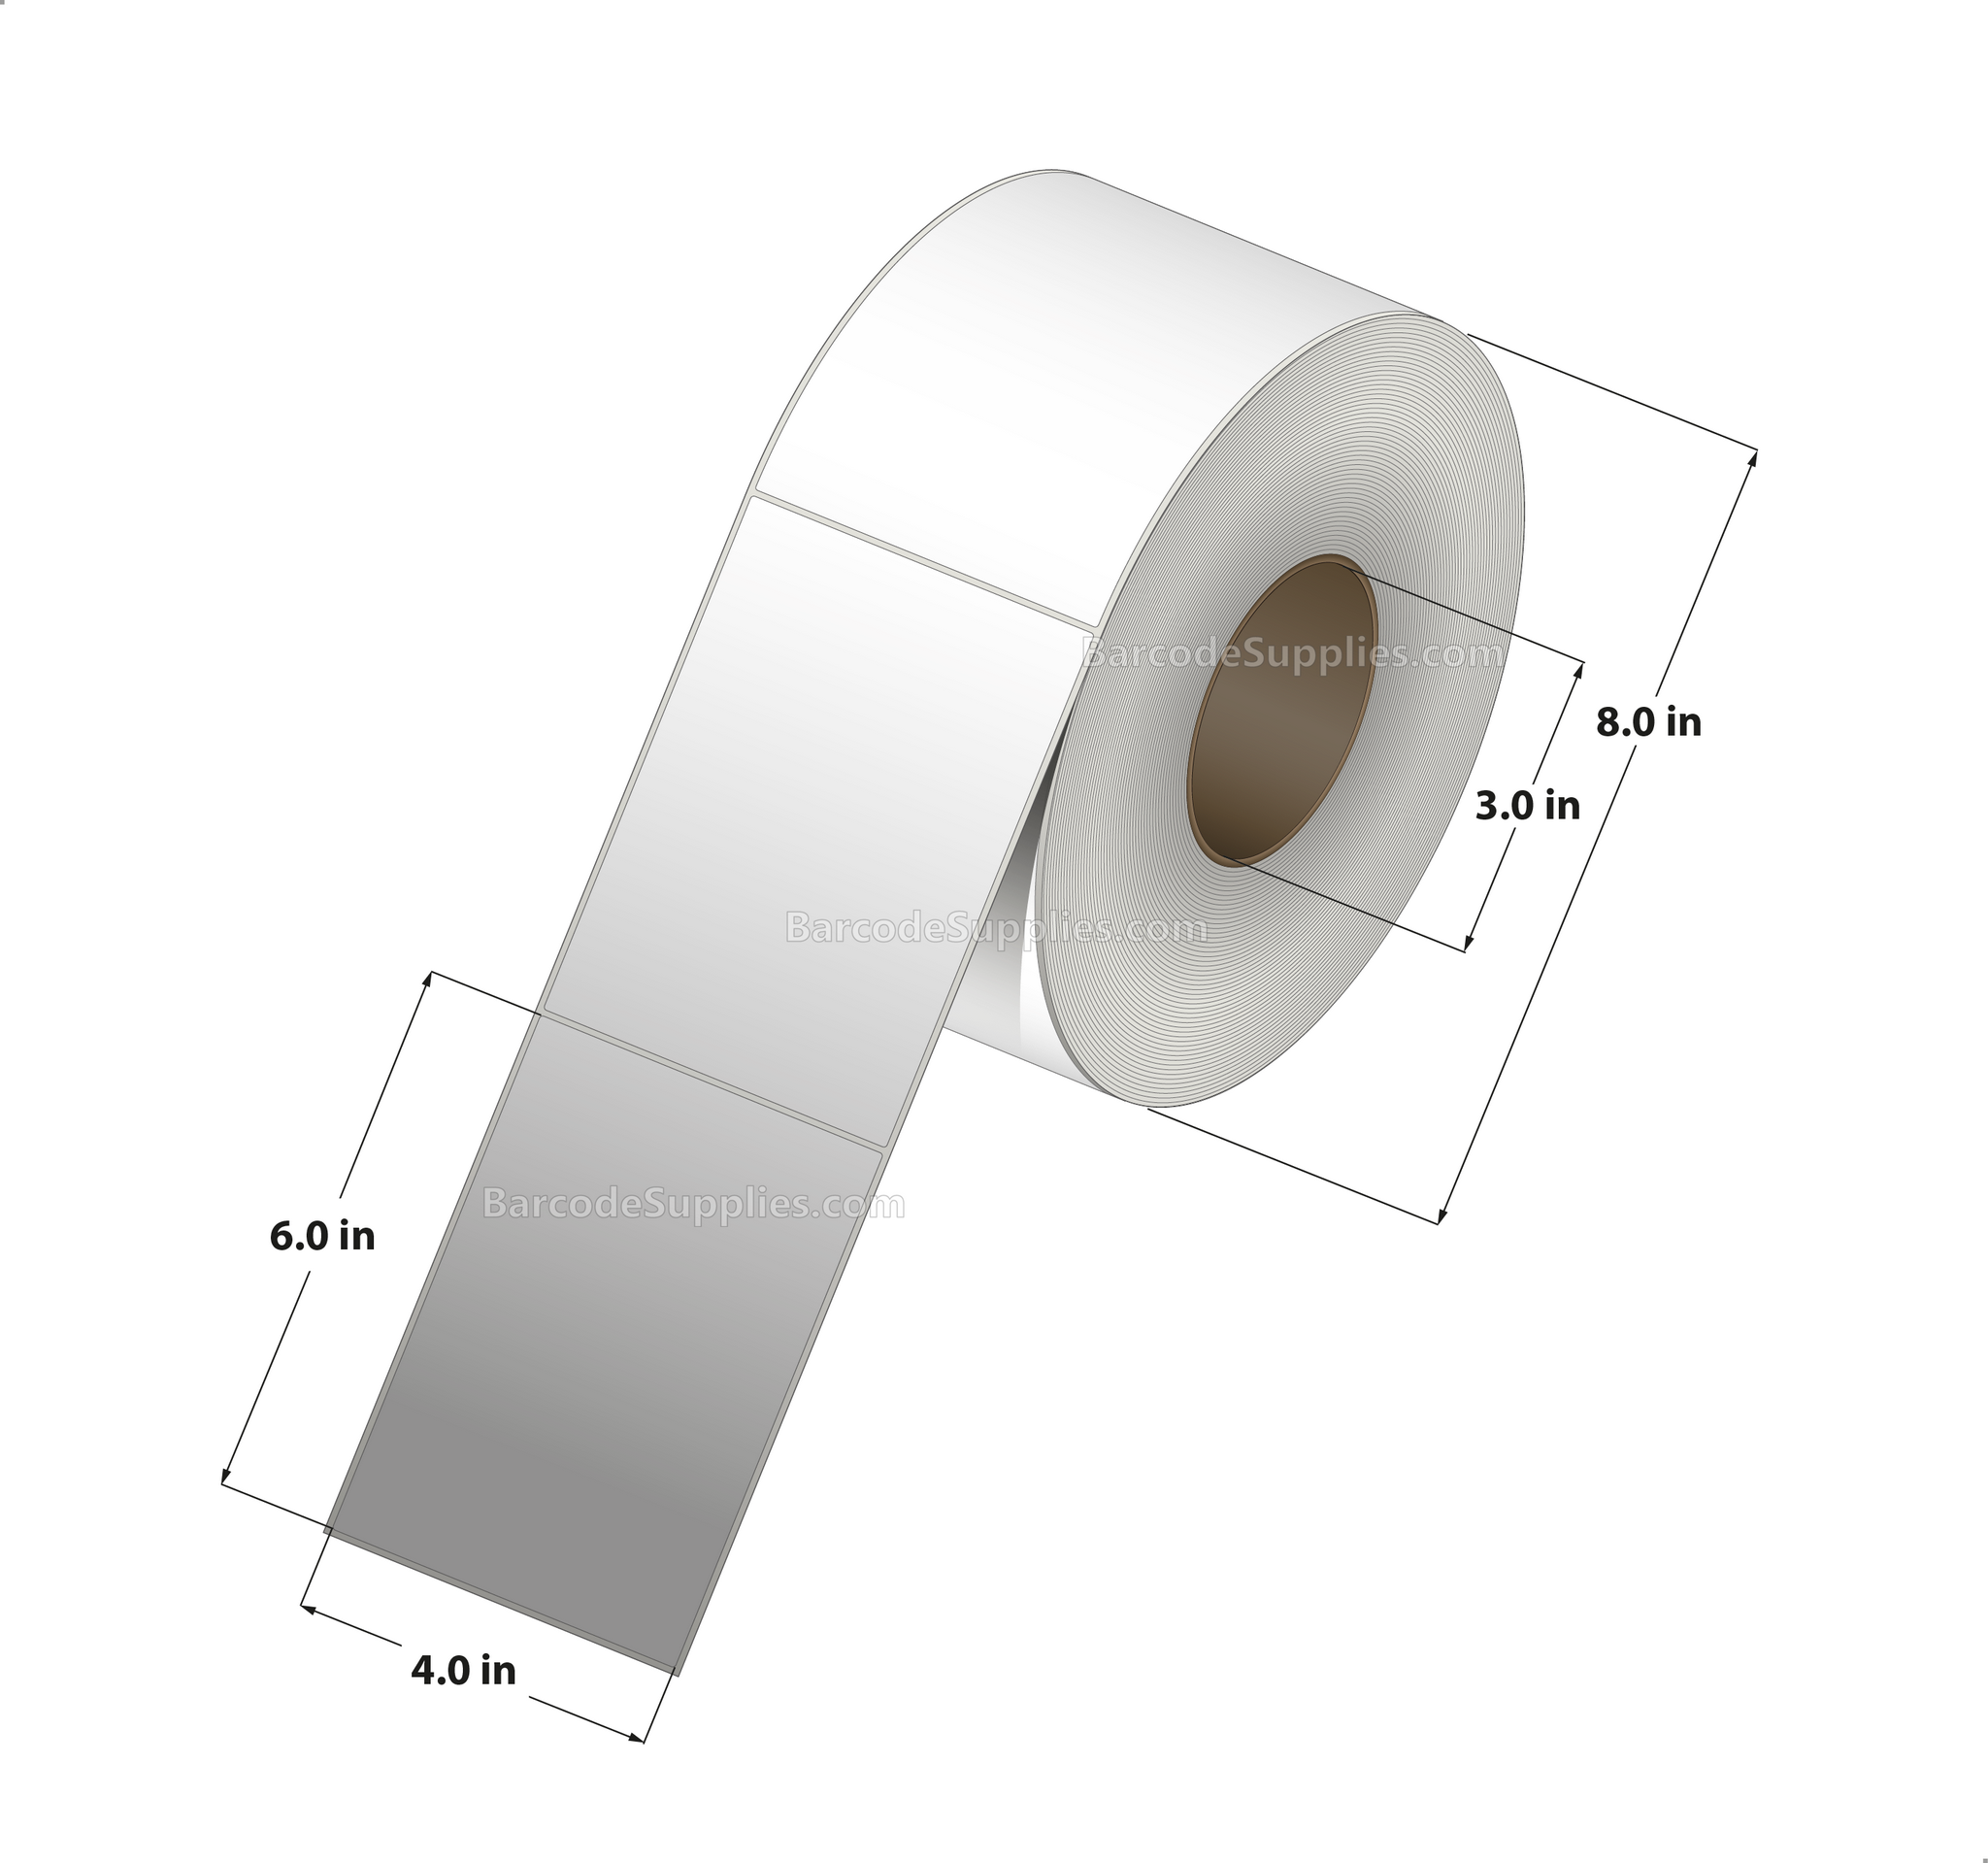 4 x 6 Thermal Transfer White Labels With Rubber Adhesive - No Perforation - 1000 Labels Per Roll - Carton Of 4 Rolls - 4000 Labels Total - MPN: CTT400600-3